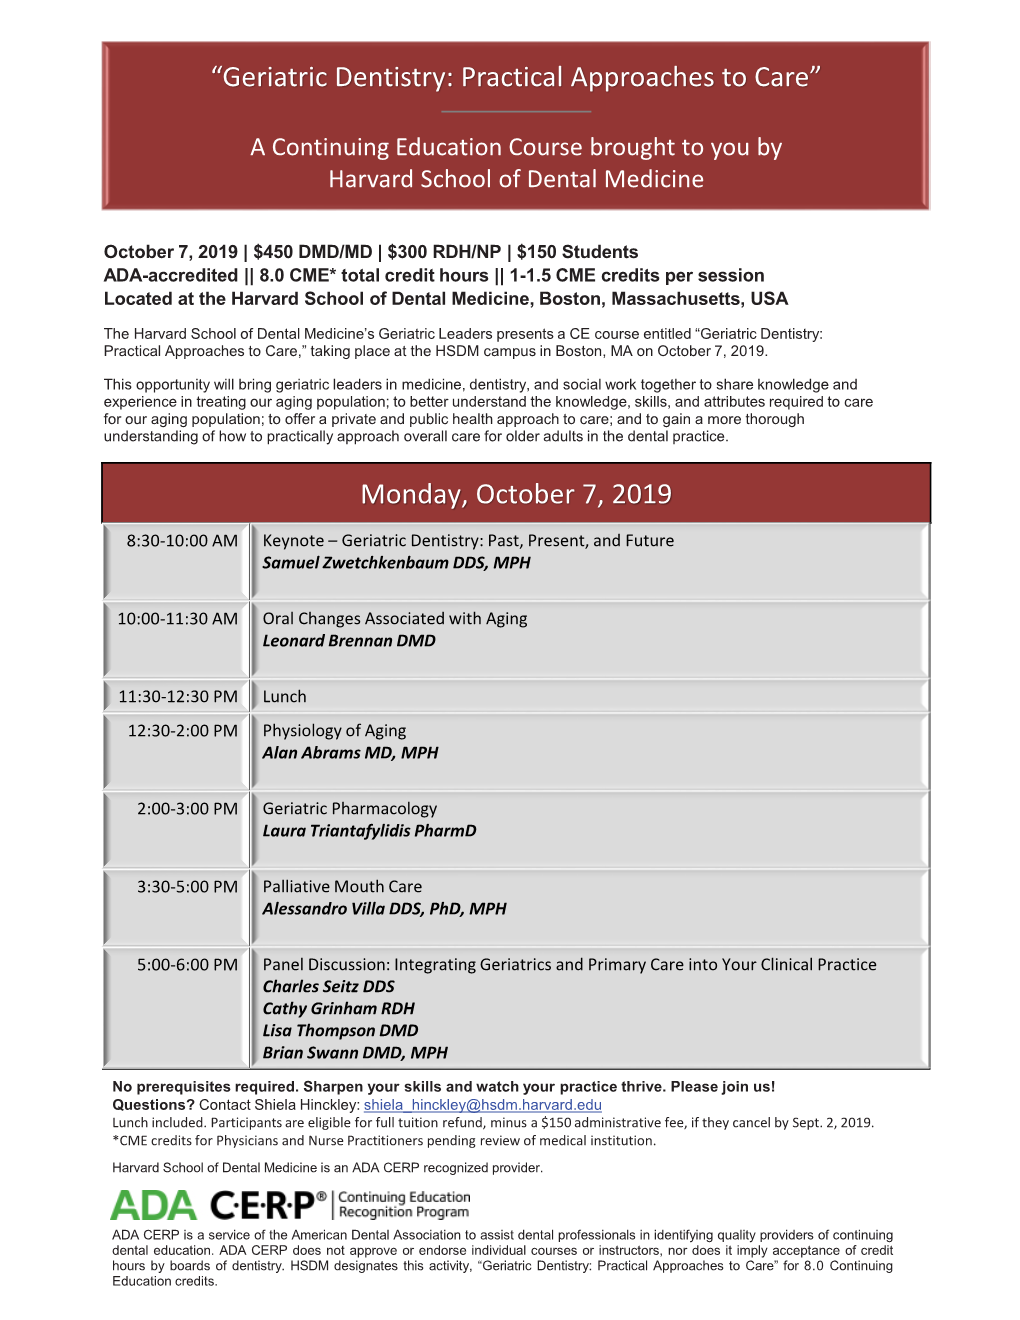 Monday, October 7, 2019 “Geriatric Dentistry: Practical Approaches To